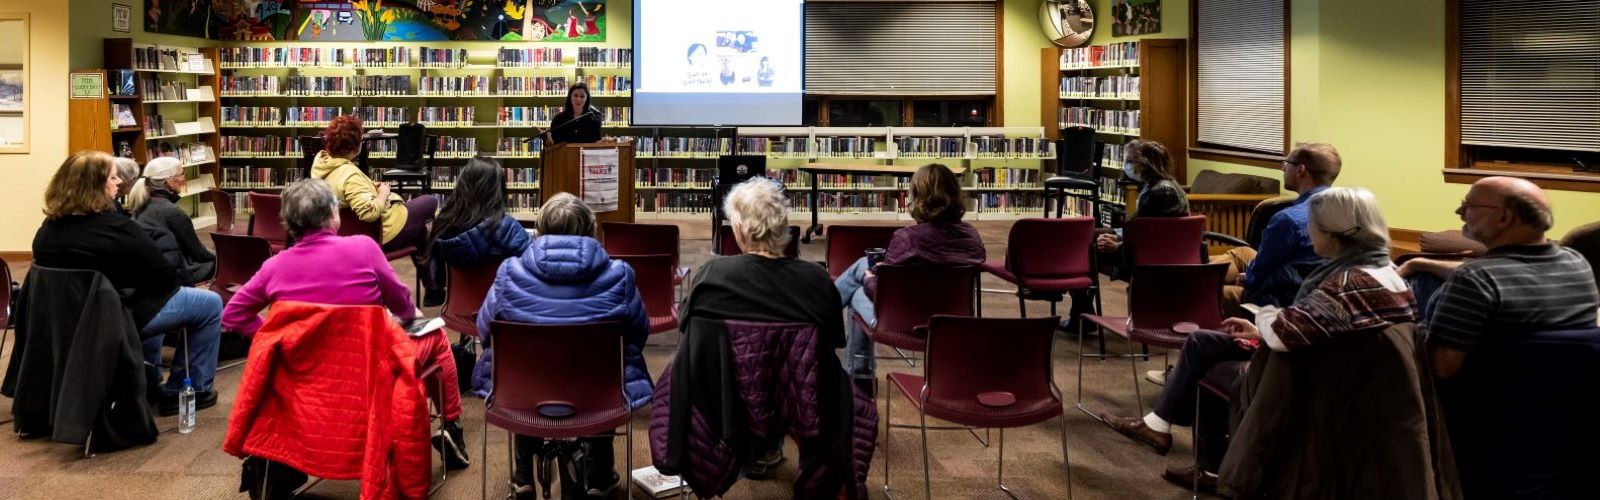 Speaker Lori Kido Lopez speaks in front of an audience at a library.